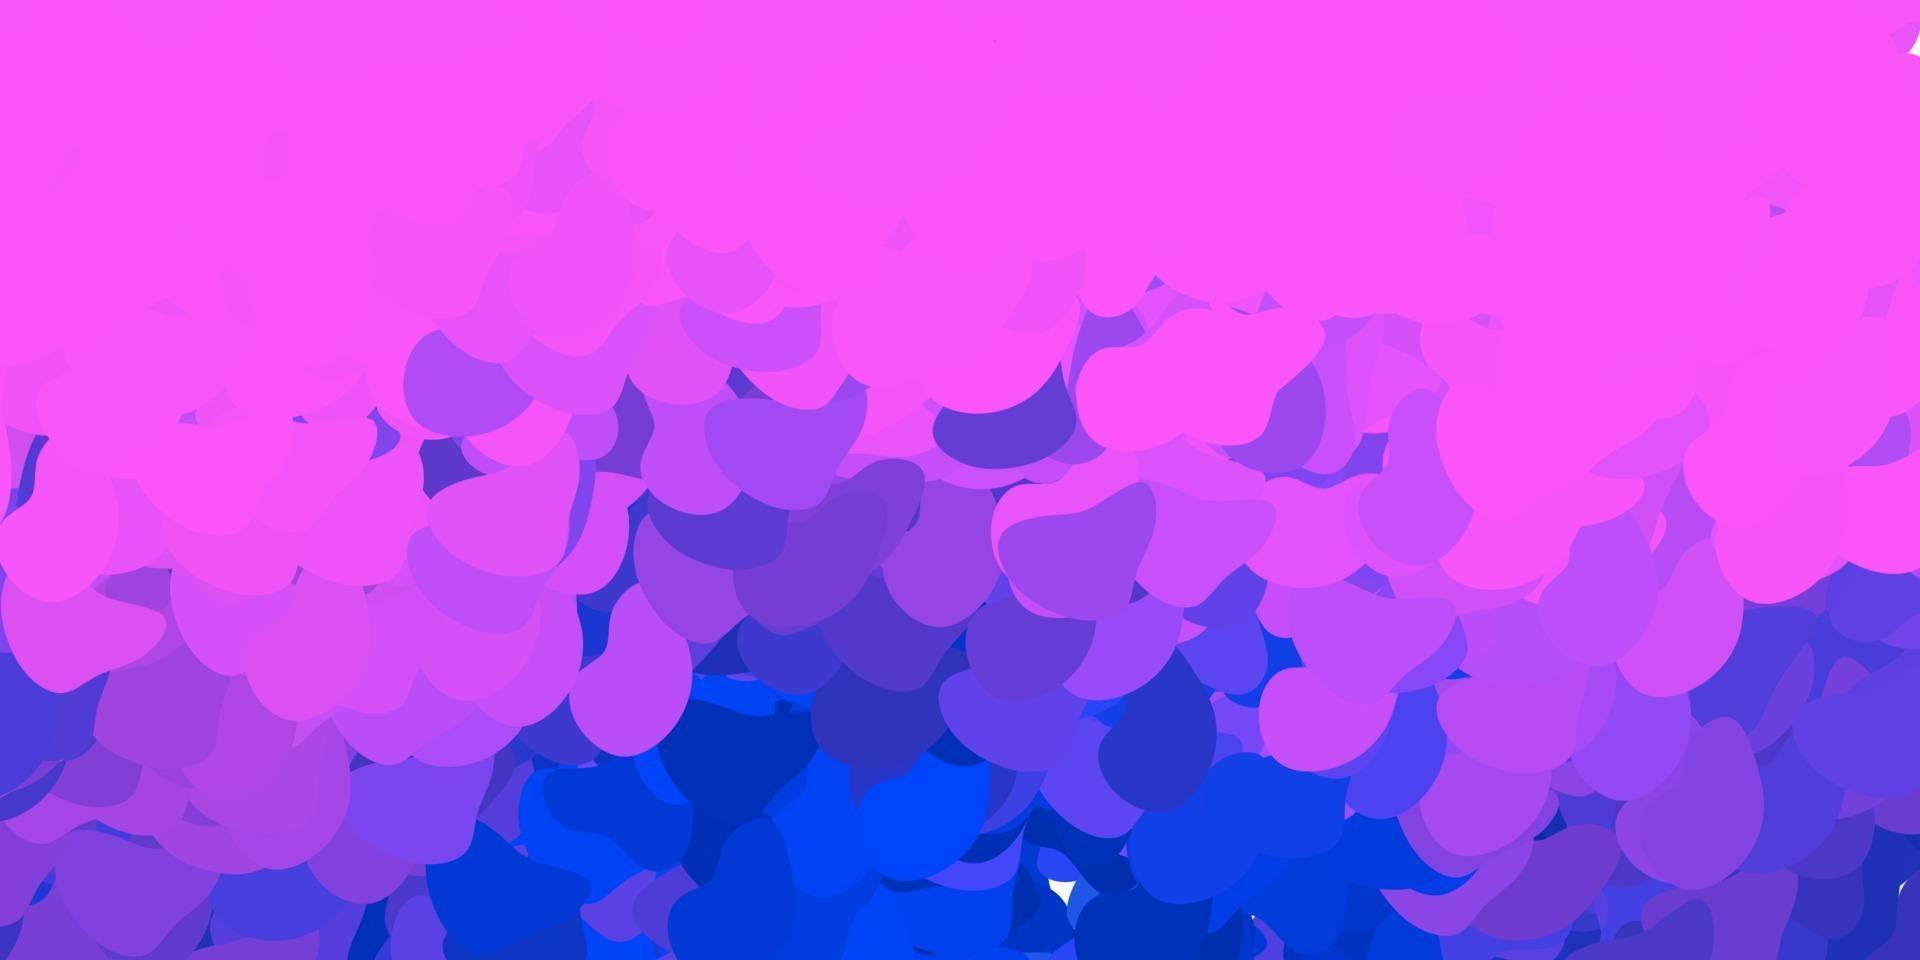 Dark pink, blue vector backdrop with chaotic shapes.